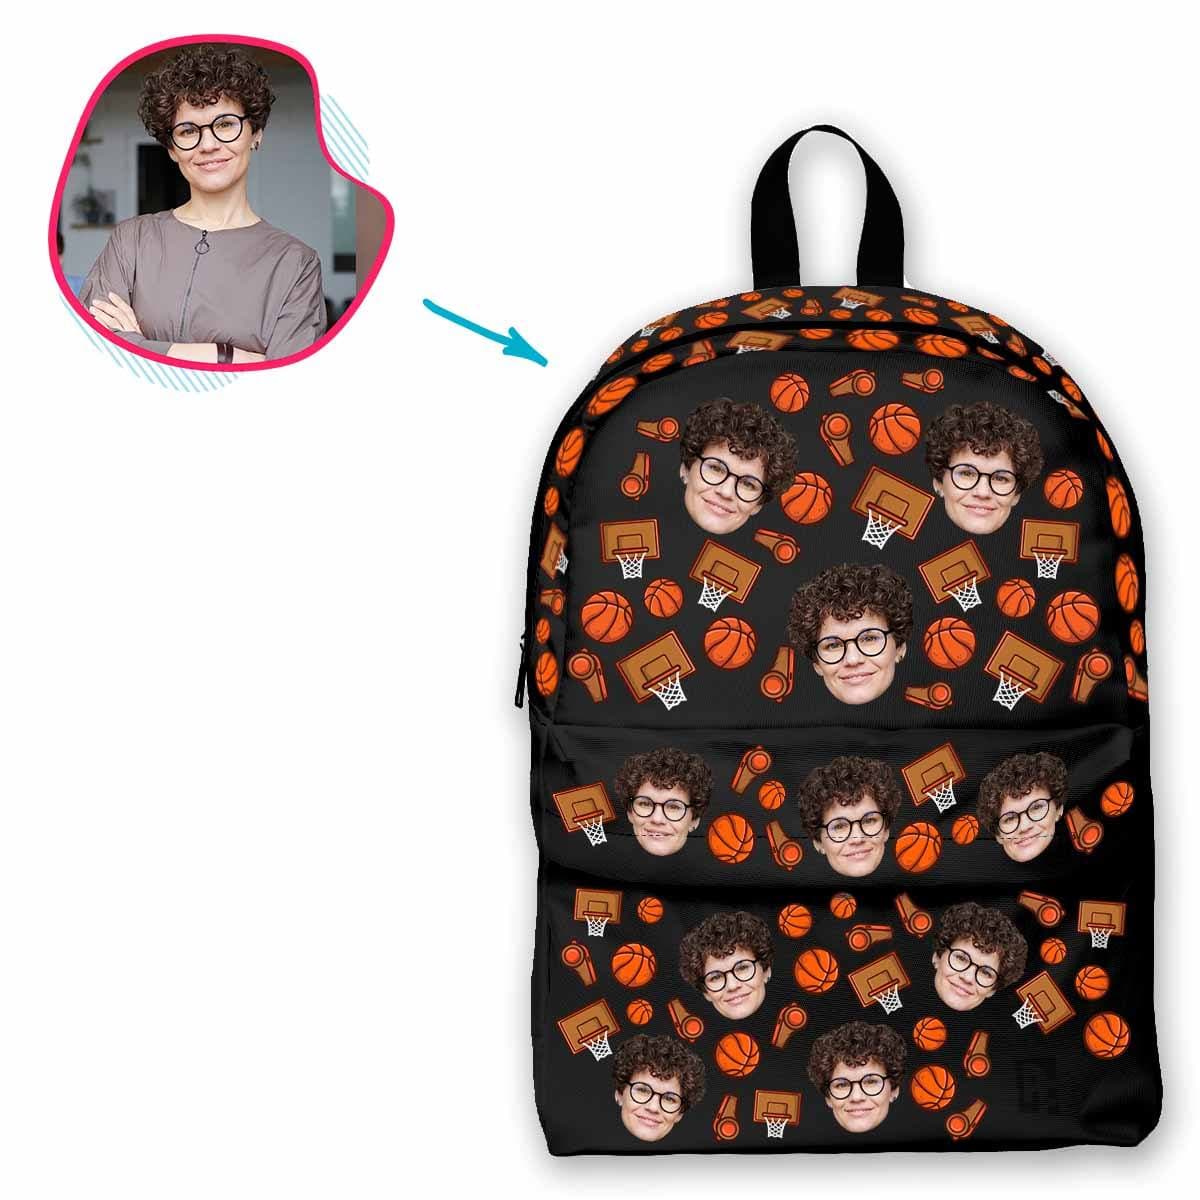 dark Basketball classic backpack personalized with photo of face printed on it